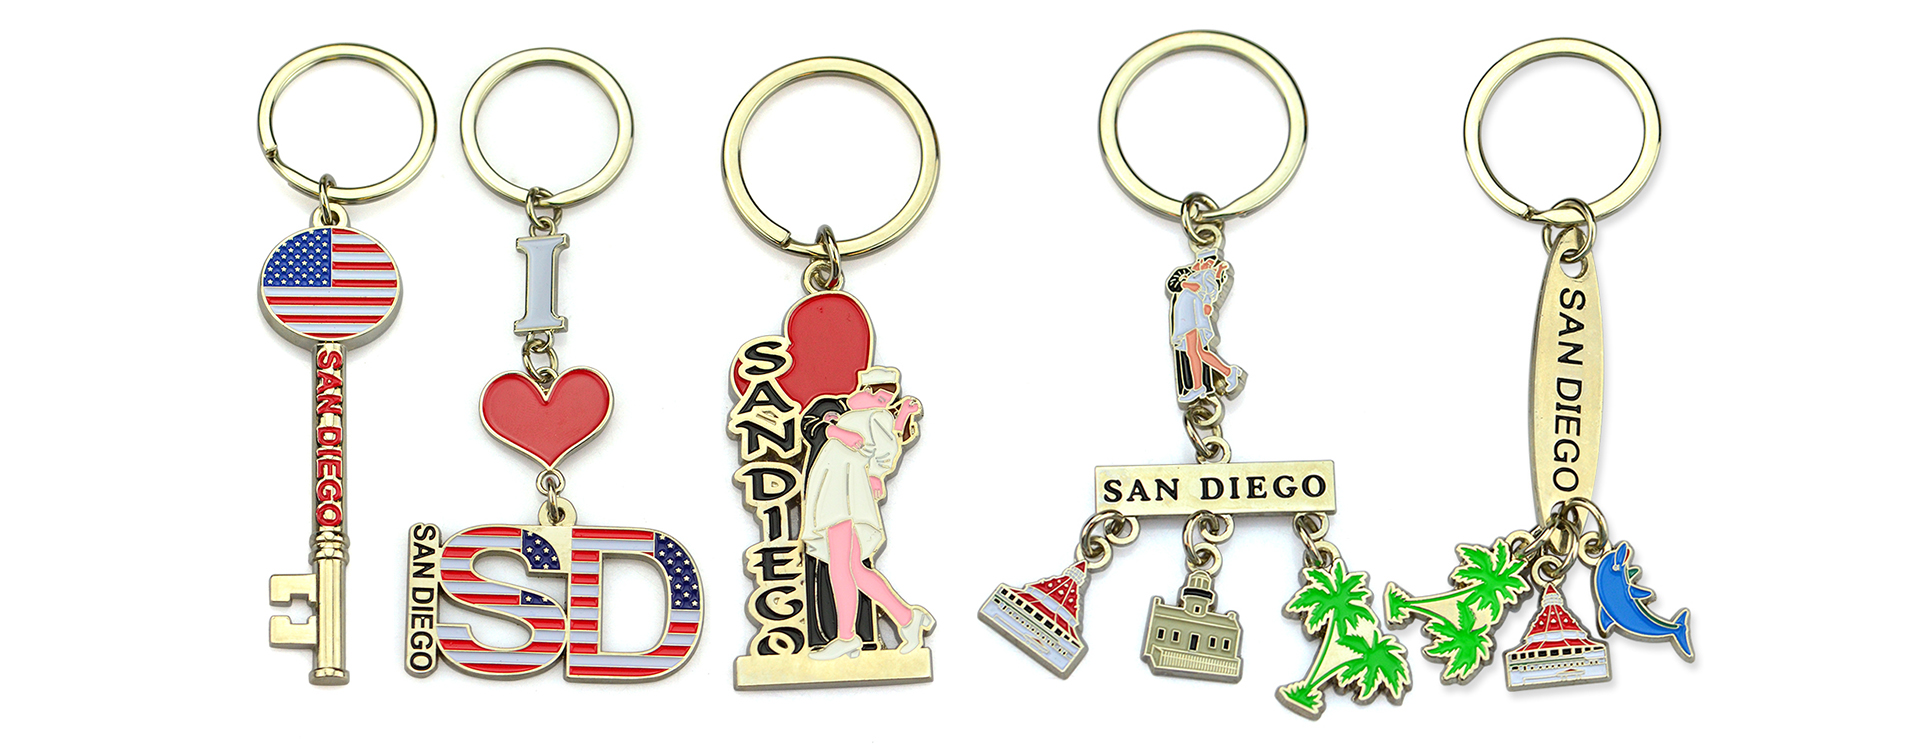 Elevate Your Brand with Custom Keychain Gift Sets from ArtiGifts' Premier Factory